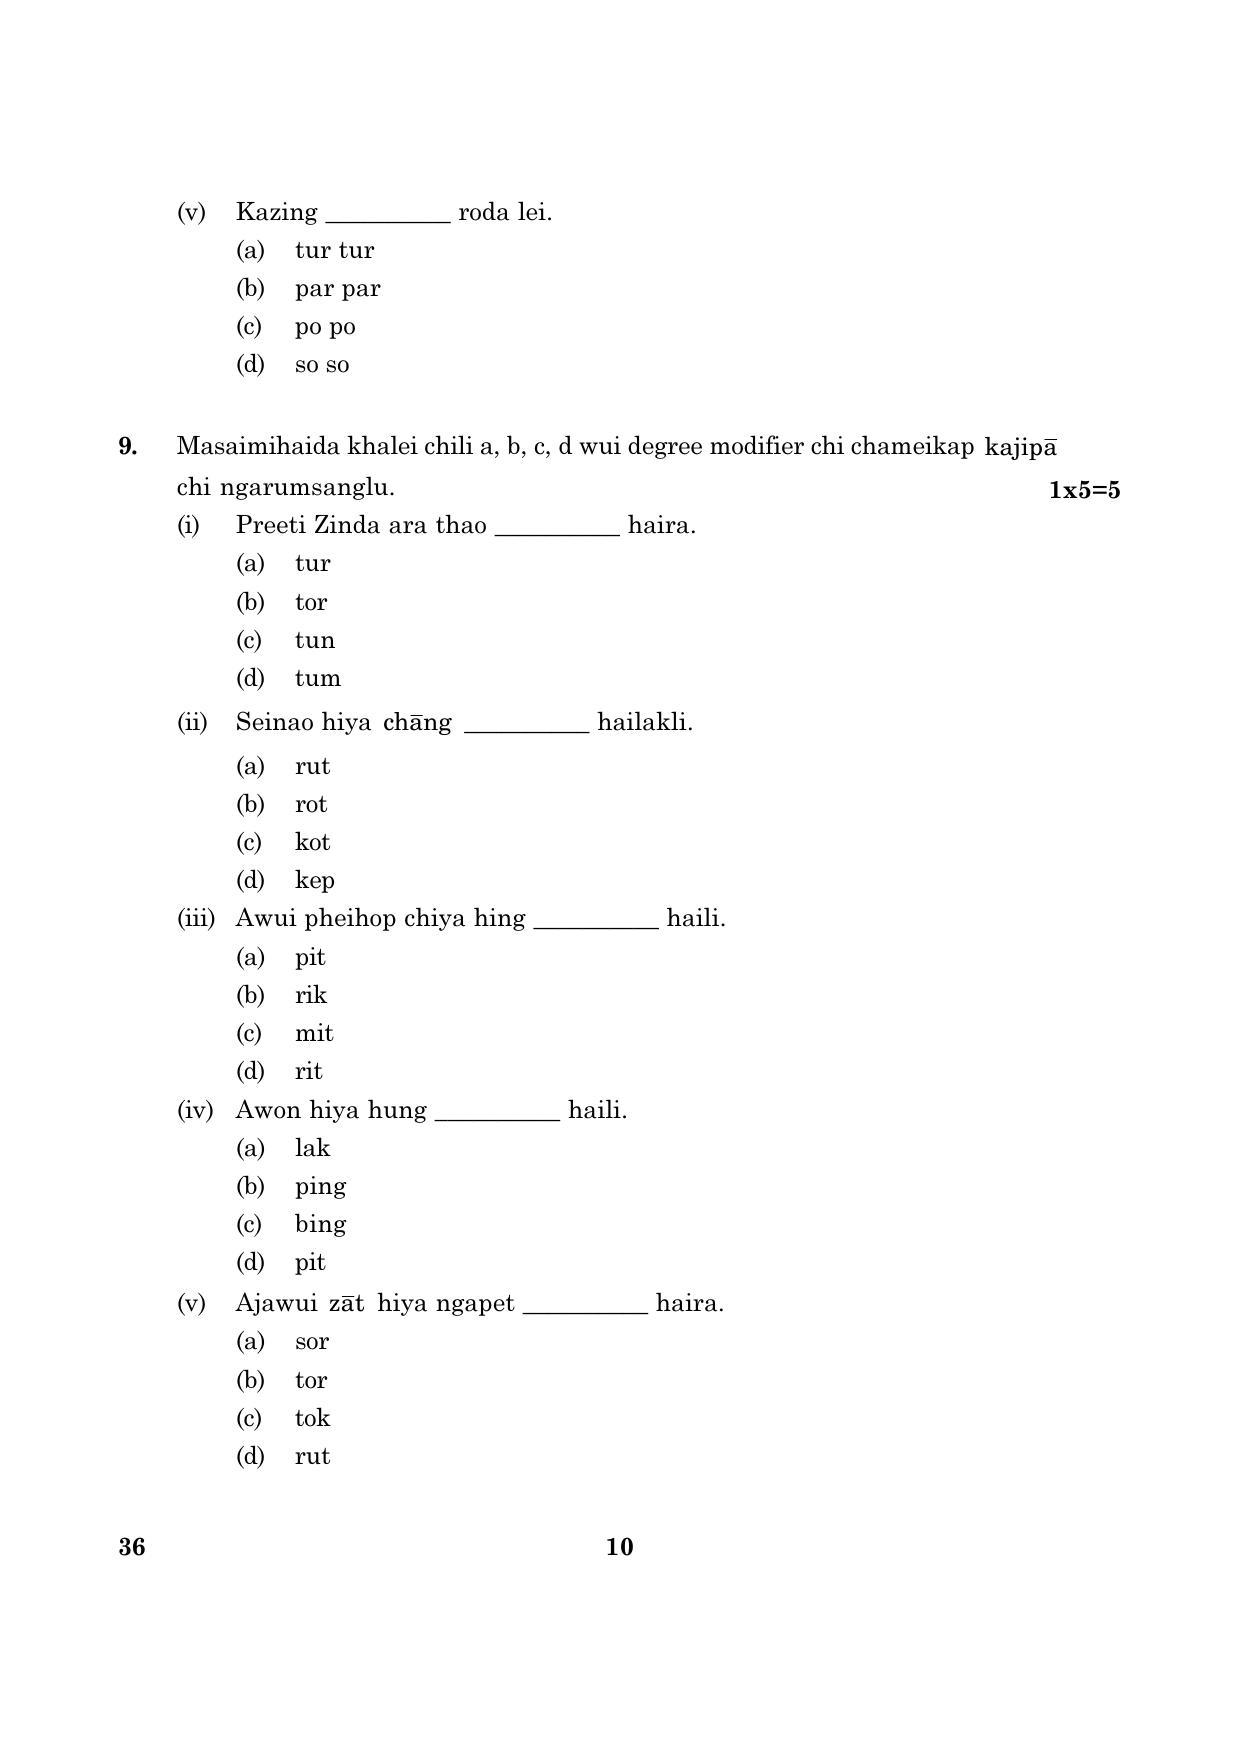 CBSE Class 10 036 Tangkhul (English) 2016 Question Paper - Page 10